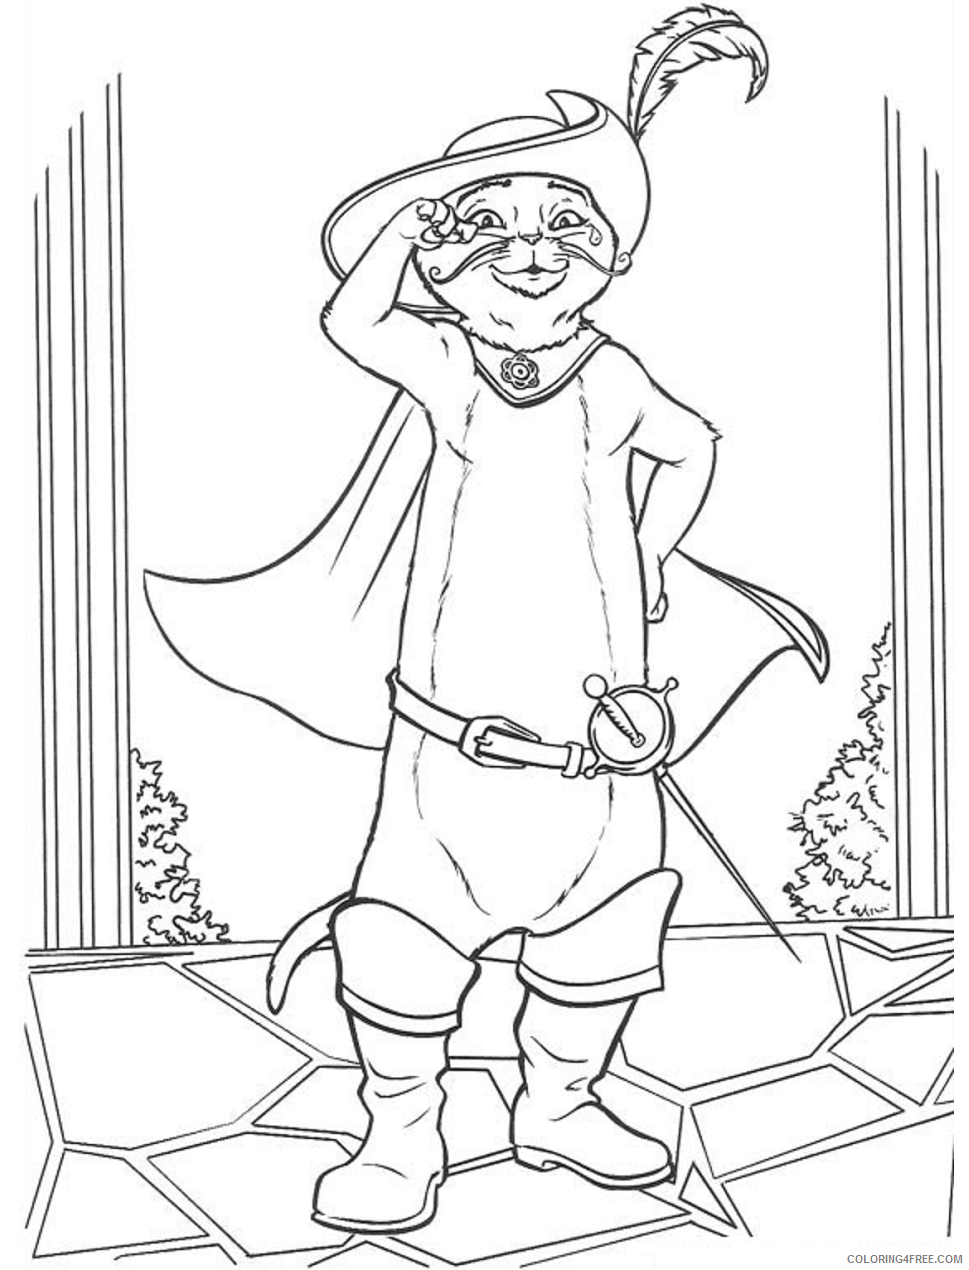 Puss in Boots Coloring Pages TV Film cool_puss_in_boots Printable 2020 06920 Coloring4free